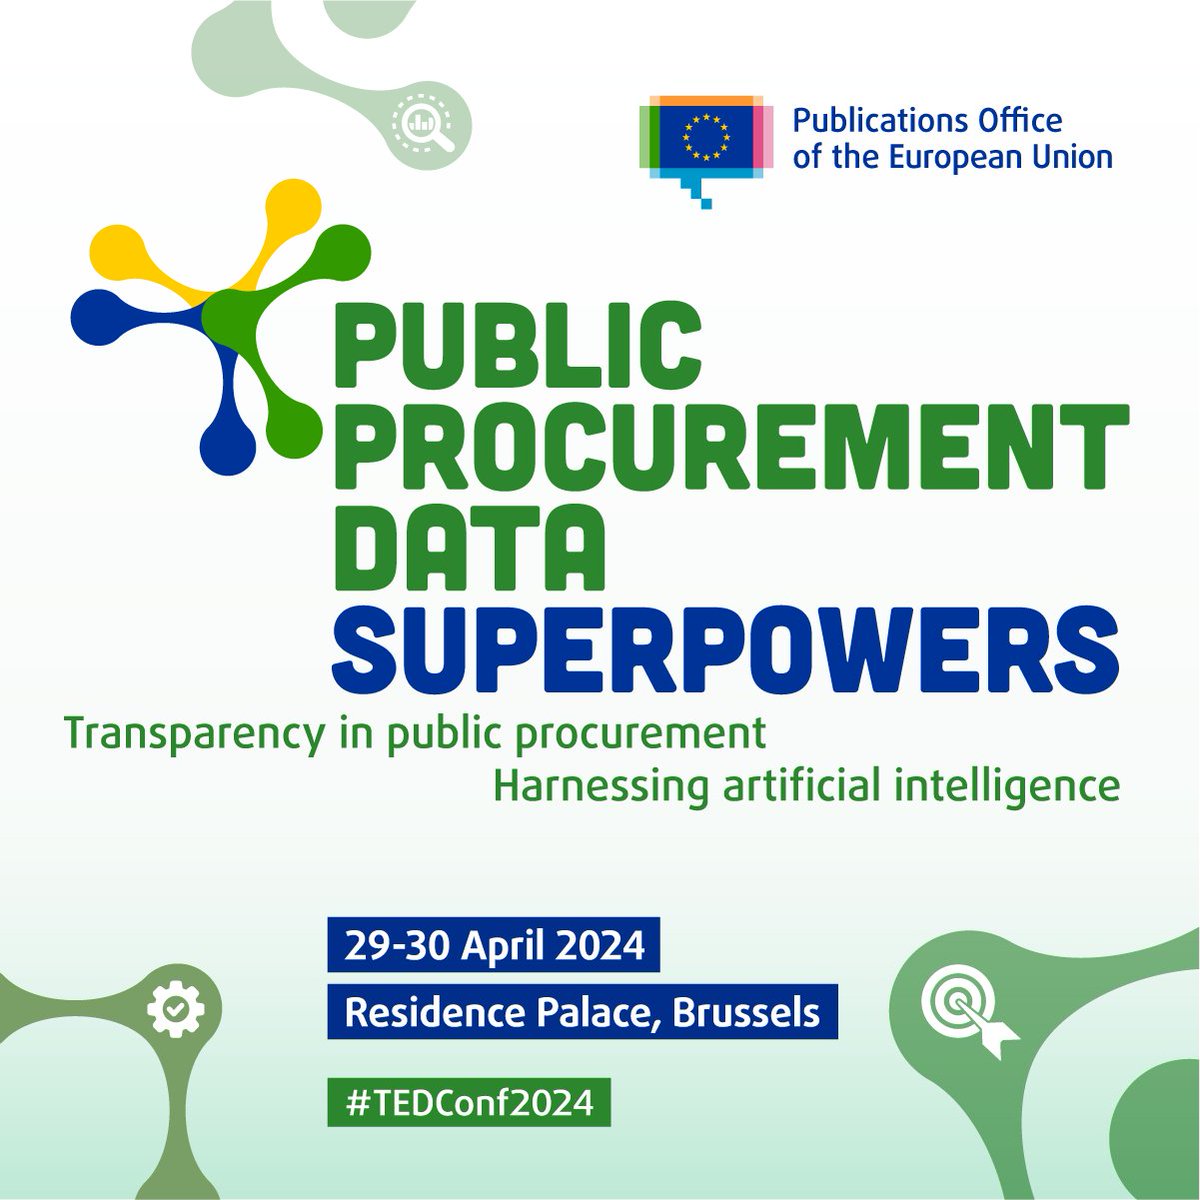 Participating at Public Procurement Data Superpowers 2024, being organised by @eulawdatapubs EU Publications Office of the European Union, to discuss how we can collaborate to harness data-driven reforms and AI  to enhance transparency in Public Procurement #TEDConf2024